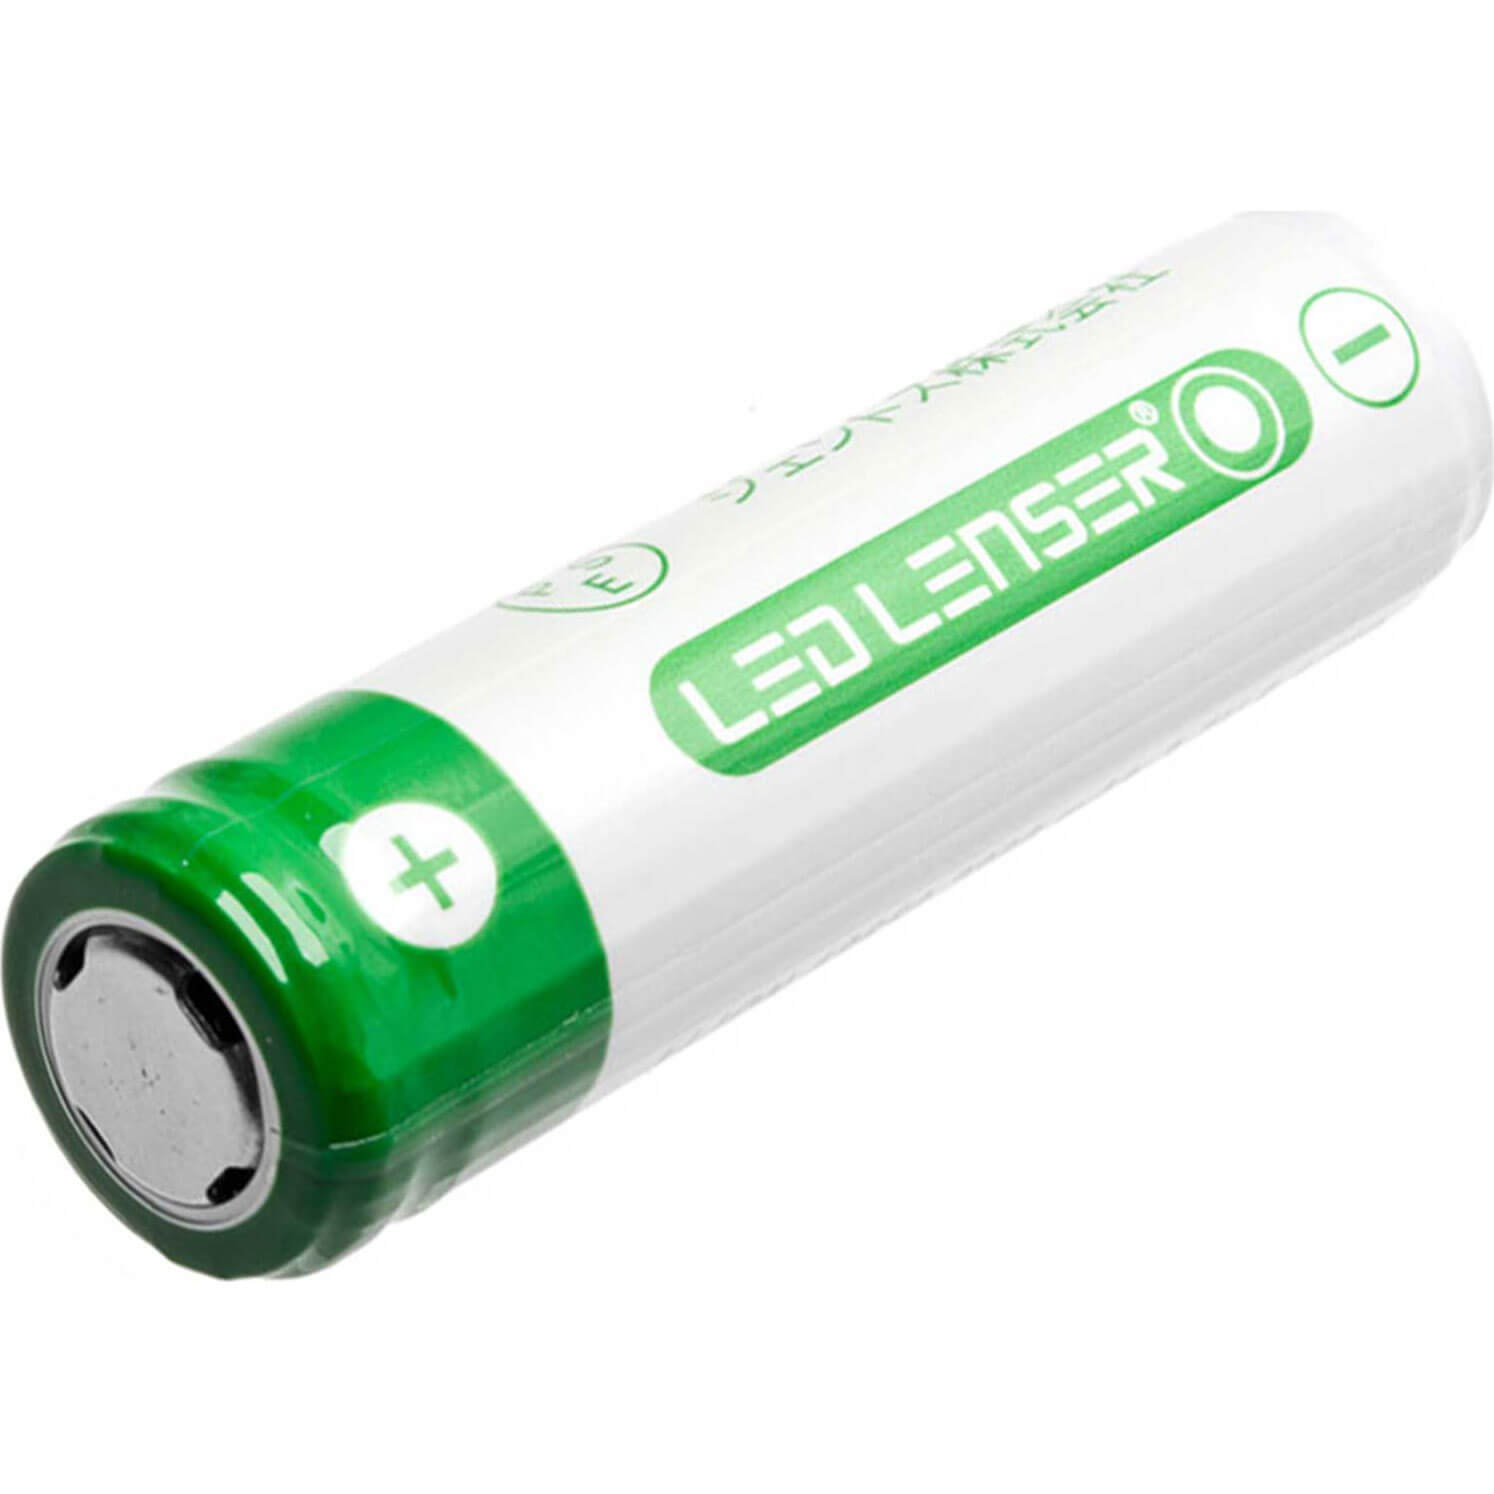 Photo of Led Lenser Genuine Rechargeable Battery For Ih8r- H8r And P7r Torches Pack Of 1